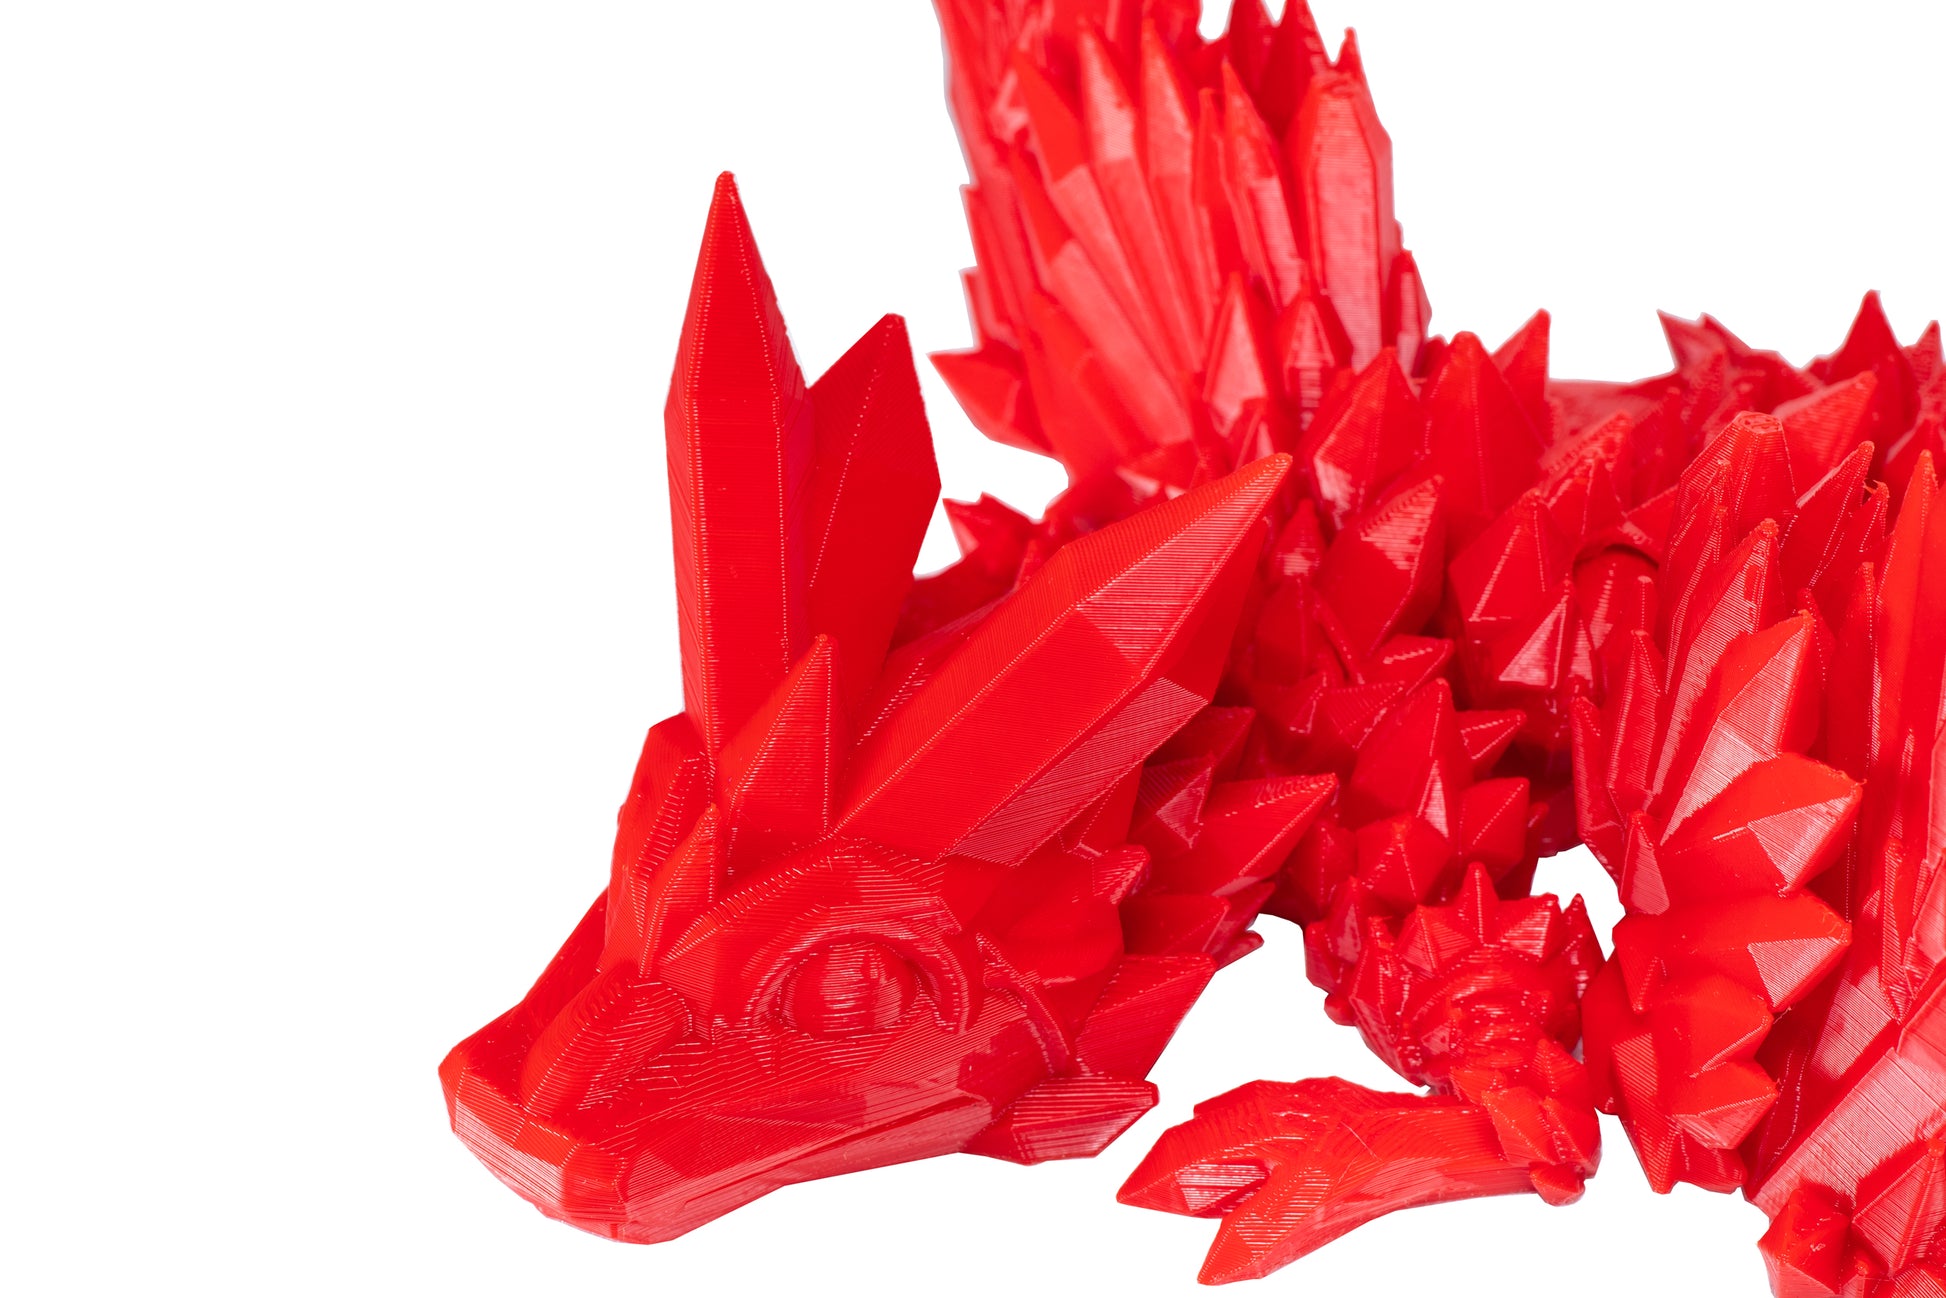 VOXELPLA PLA 1.75mm Red for 3D printing Test Print 4